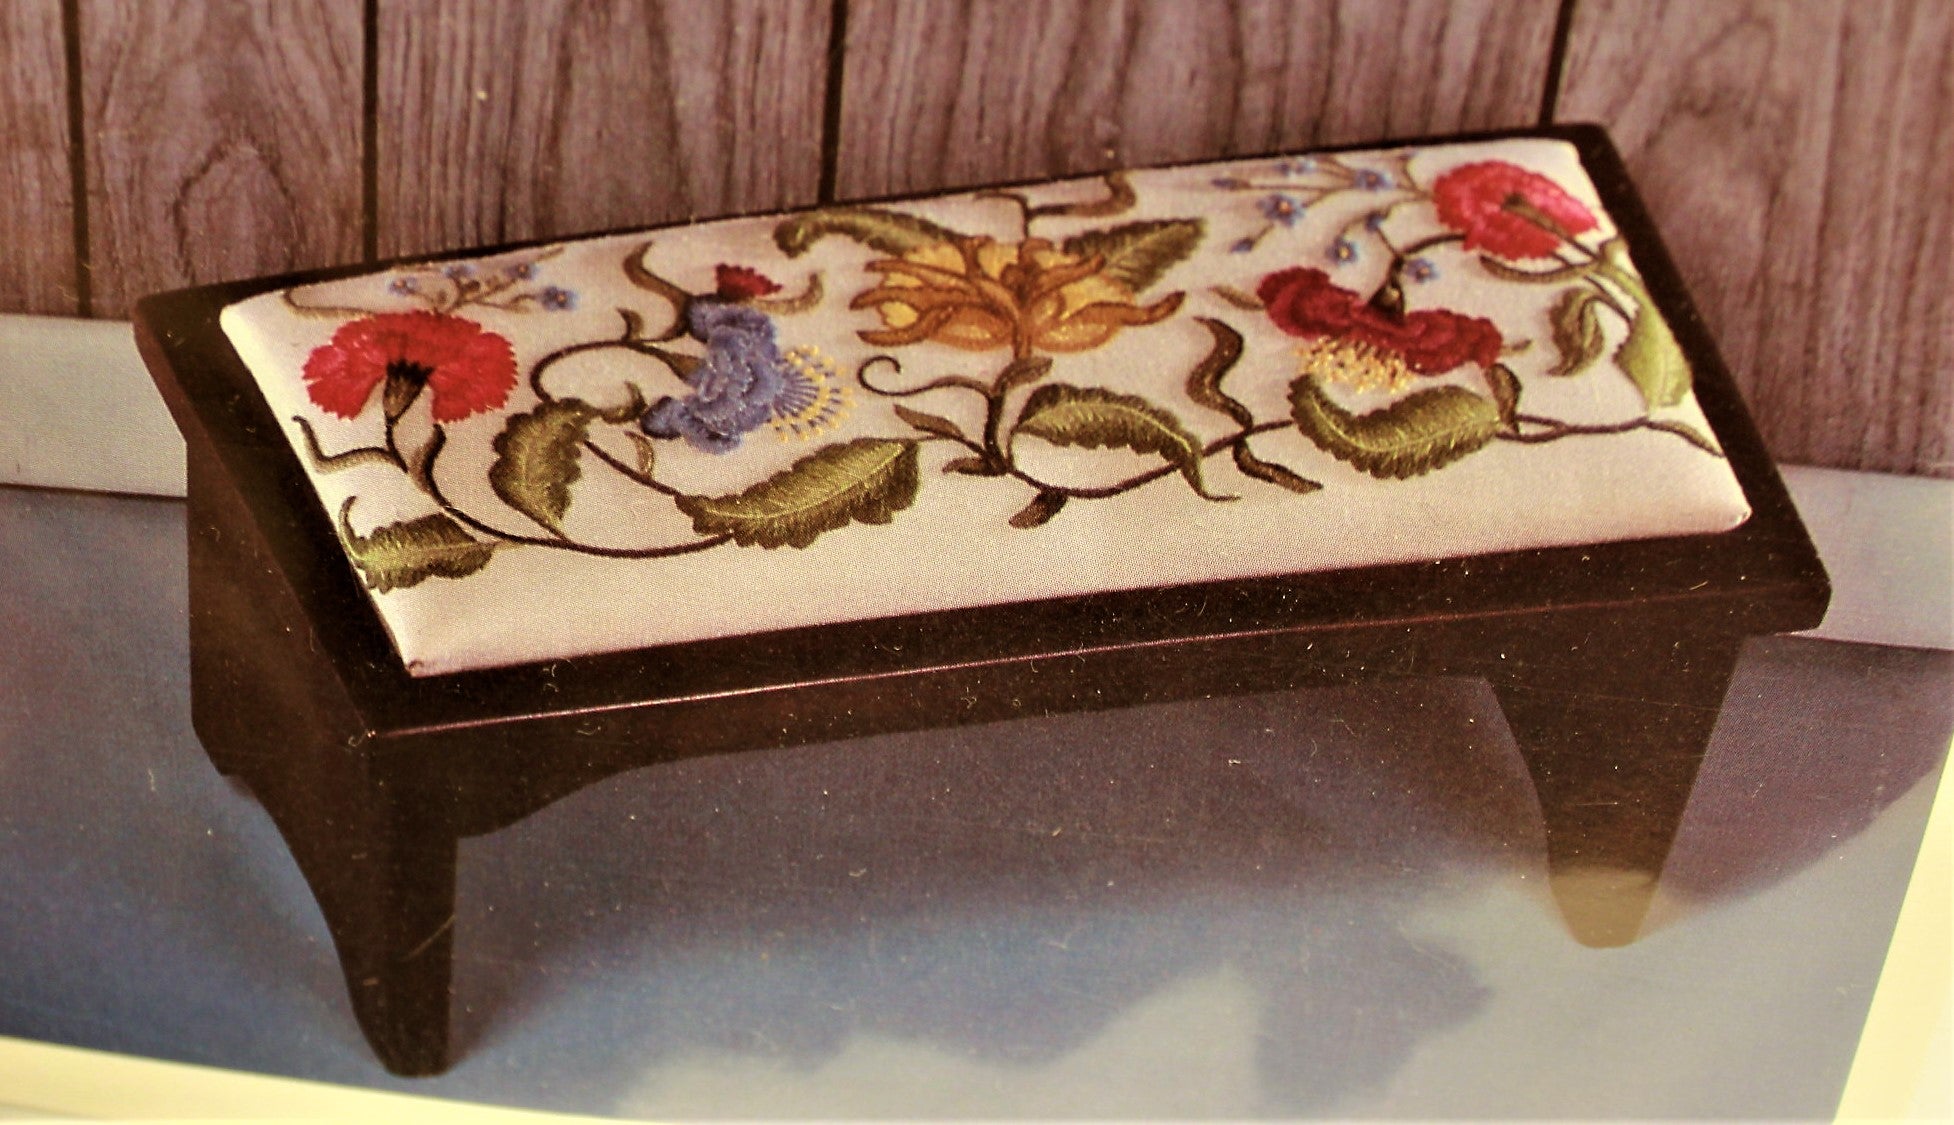 https://cdn.shopify.com/s/files/1/0053/9042/products/Custom_House_189_Colonial_Flowers_Stool_Cover_Crewel_Embroidery_Kit_Design_7_x_19_30_1.JPG?v=1571439066